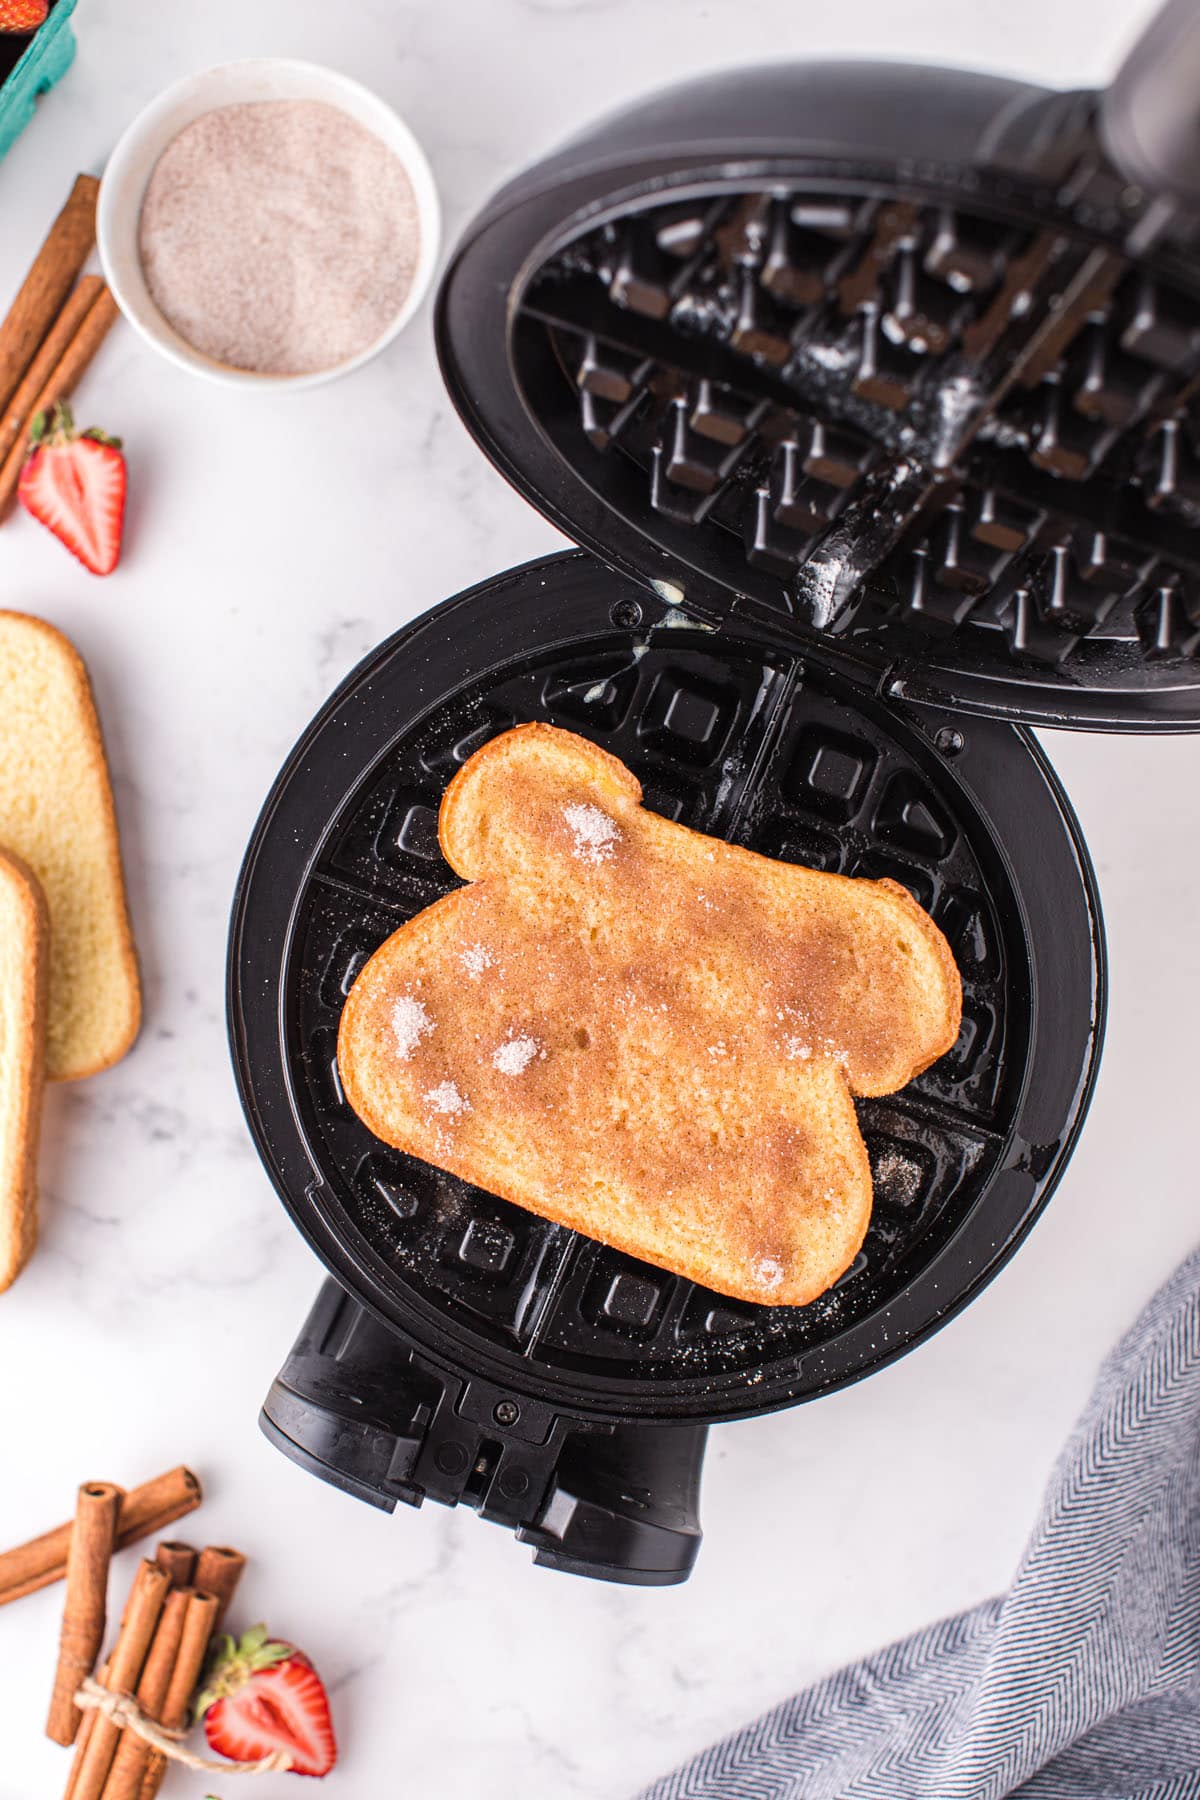 place egg in waffle maker